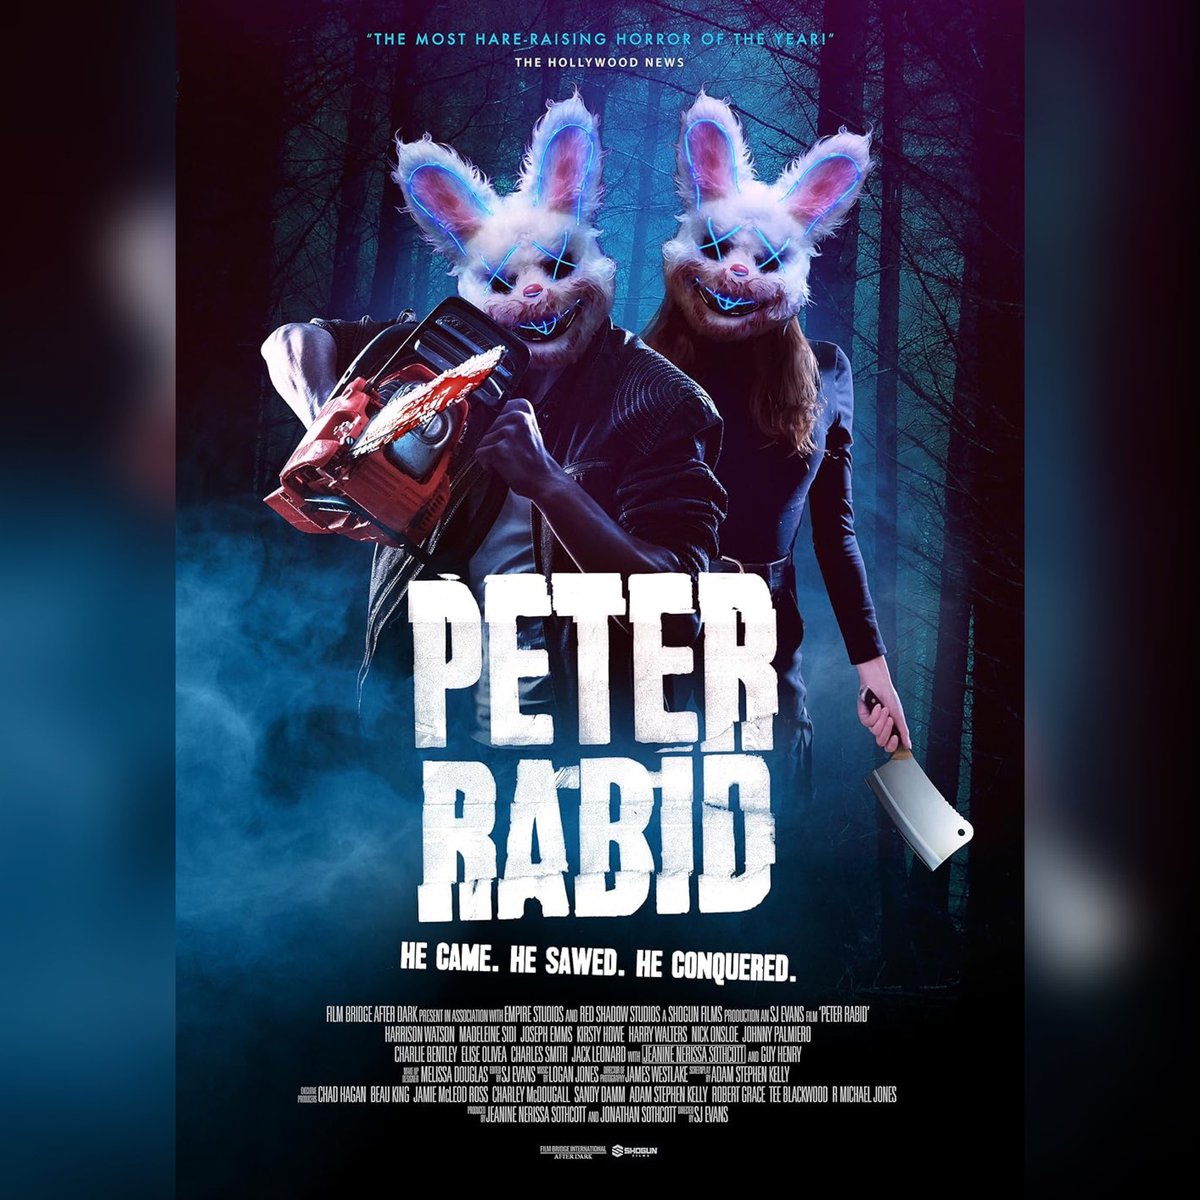 Happy Birthday @sothcott I can’t wait for everyone to see our film #PeterRabid & I look forward to whatever @ShogunFilms projects are in the future. I hope you & @JeanineNerissaS are having a lovely day 🥳🥳🥳